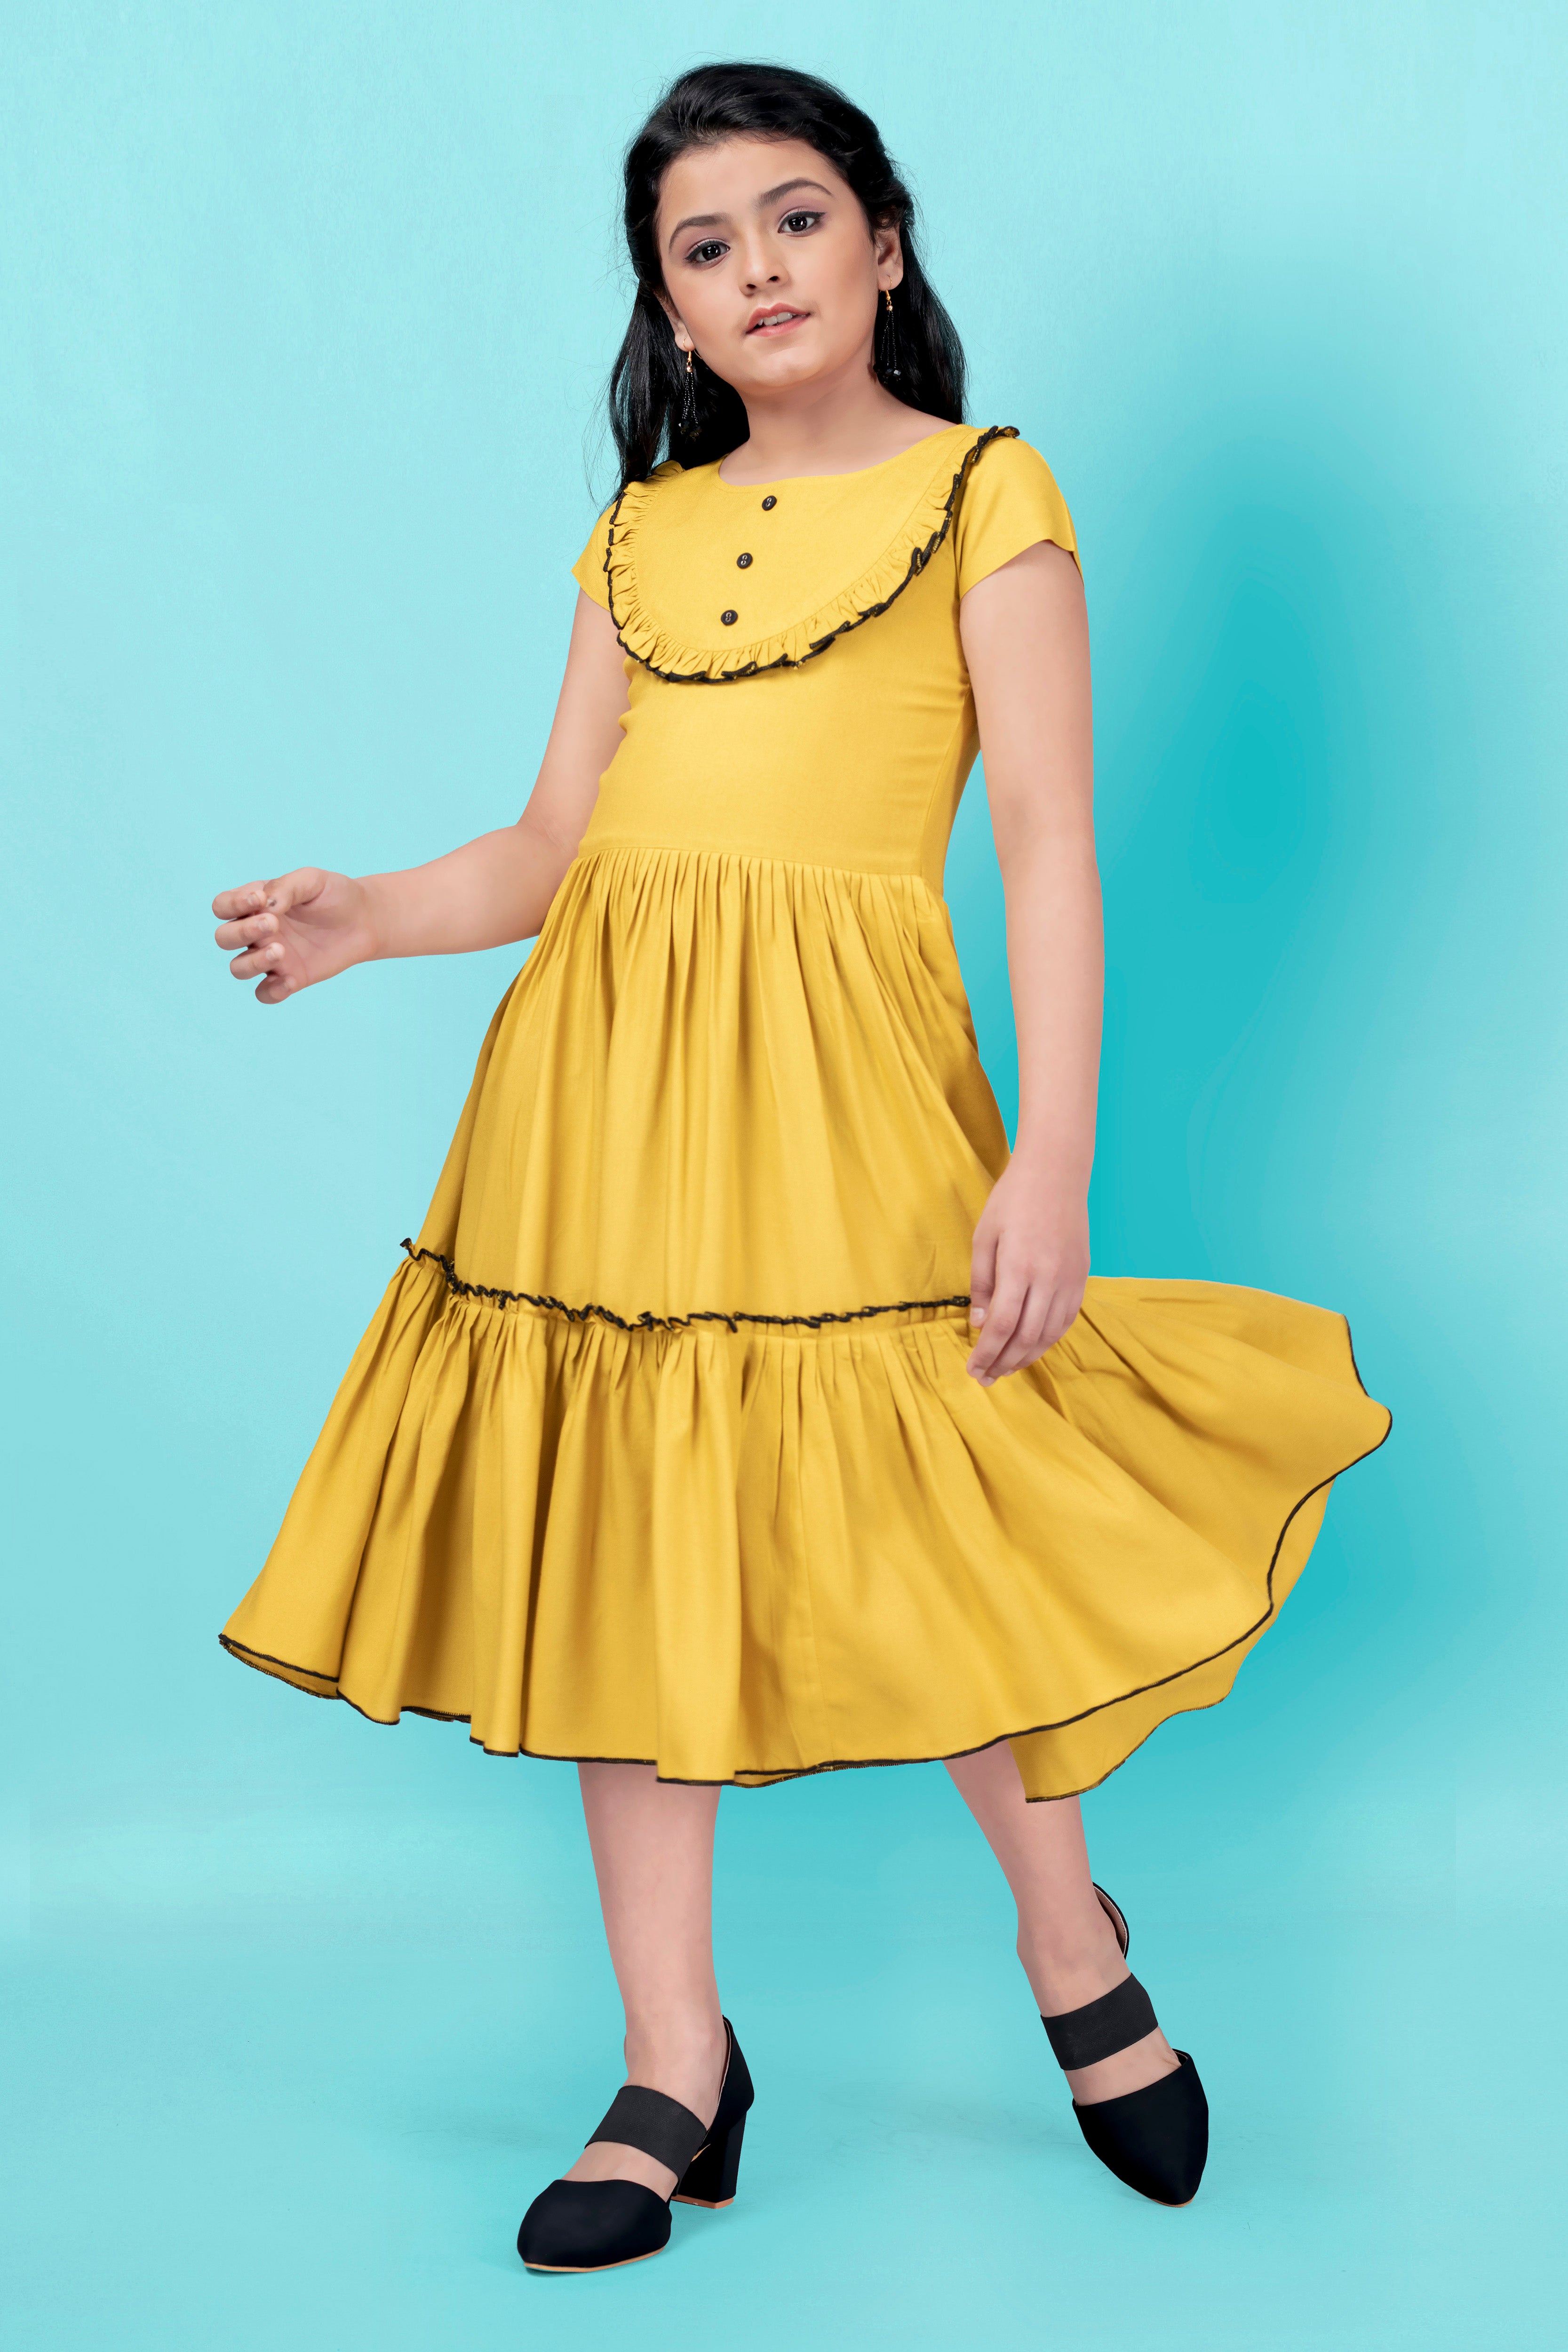 Bow Frill Dress for Young Girls - Toddlers – Rachel Riley US